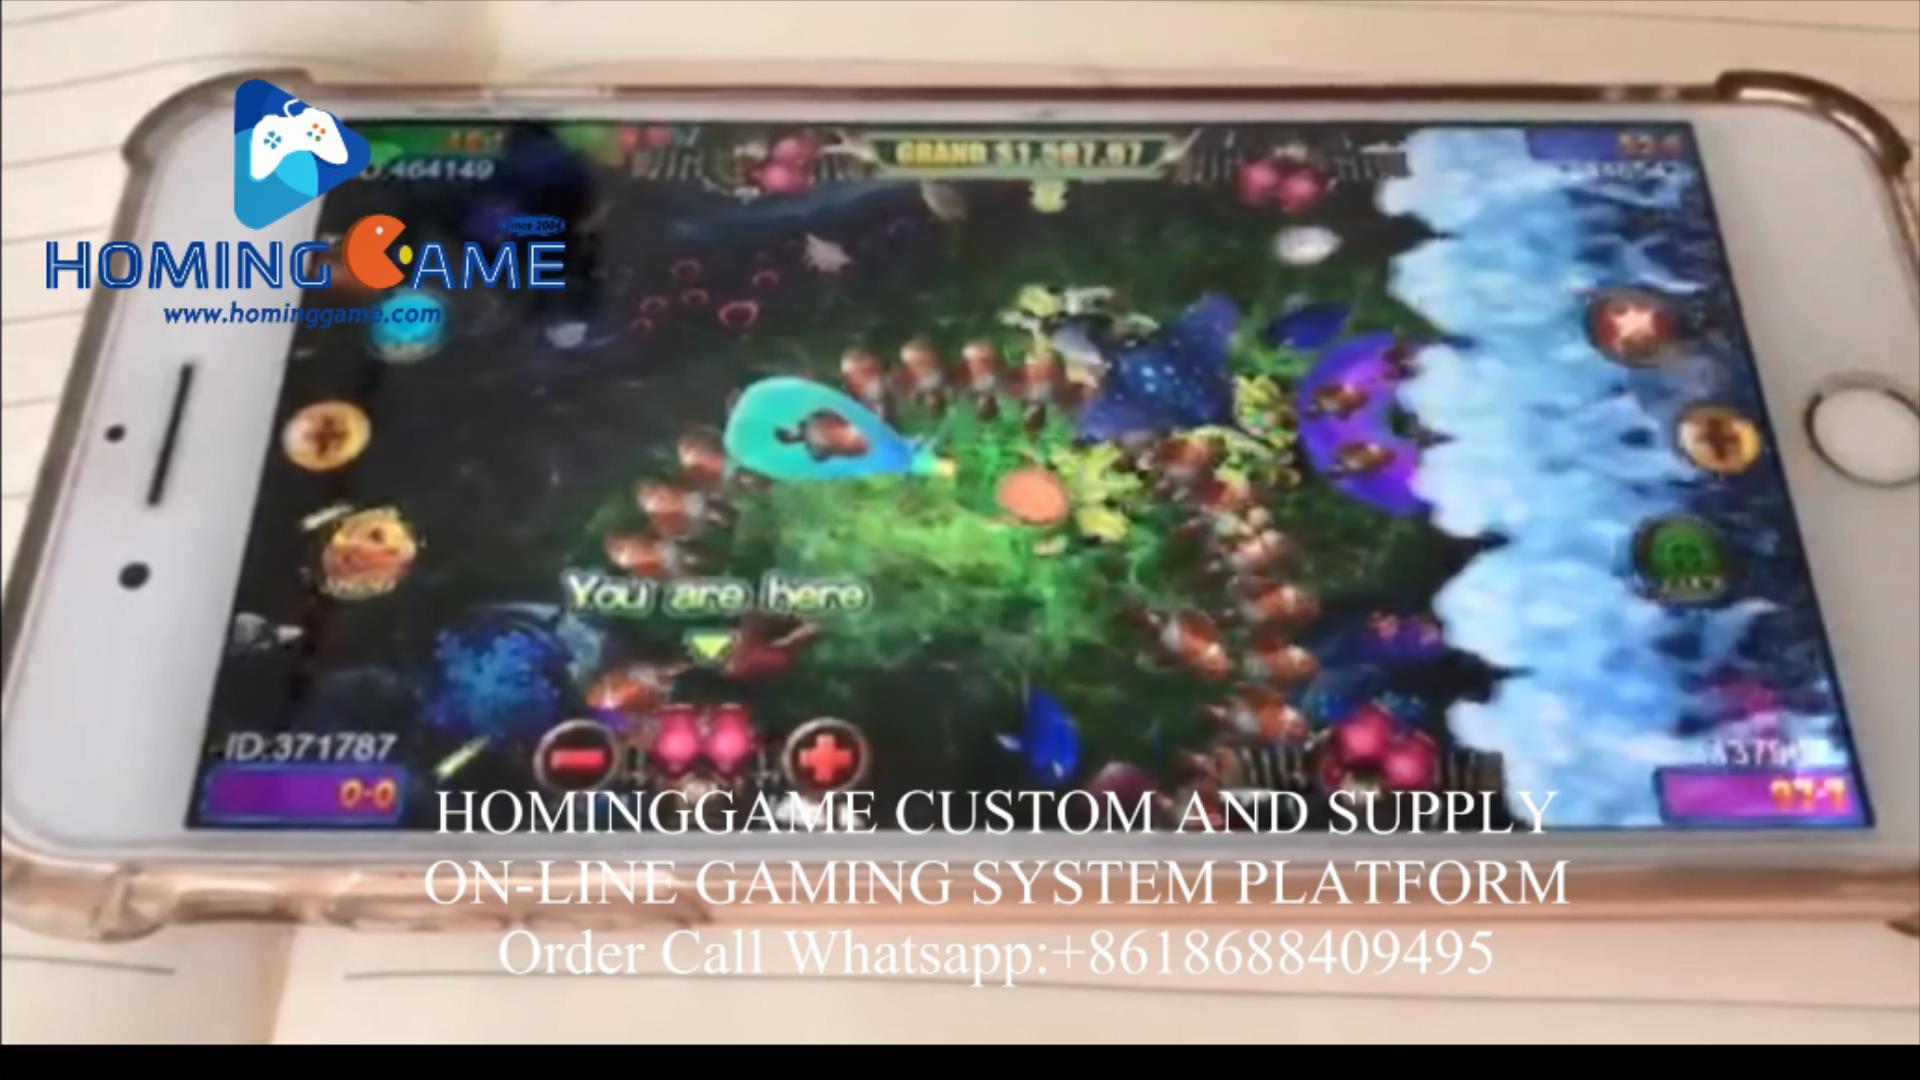 Download 2021 USA Best online Fishing Game APP,2021 HomingGame Top Online Fishing Game And Slot Game app platform(Order Call Whatsapp:+8618688409495),online fishing game app,fishing game app,online slot game apps,download fishing game app,dowanload online fishing game apps,online gaming system,fishing game,fishing table,fishing table game machine,fishing game machine,fishing arcade game machine,fish hunter fishing game machine,upright table fishing game machine,standup fishing game machine,ocean king 3 fishing game machine,capatian america fishing game machine,tiger stirke fishing game machine,godzilla fishing game machine,rampage fishing game machine,dragon legend fishing game machine,ocean king,igs fishing game machine,electrical fishing game machine,usa fishing game machine,ocean king 2 fishing gam emachine,fishing game machine supplier,fishing game machine manufacturer,gaming machine,gambling machine,game machine,arcade game machine,coin operated game machine,indoor game machine,electrical game machine,amusement park game equipment,amusement machine,gaming,casino gaming machine,usa fishing game machine supplier,USA fishing table game machine manufacturer,fishing game cheats,fishing game skills,how to paly the fishing game machine,fishing game decoding,fishing game decoder box,hominggame,www.gametube.hk,hominggame fishing game,entertainment game machine,family entertainment game machine,arcade game machine for sale